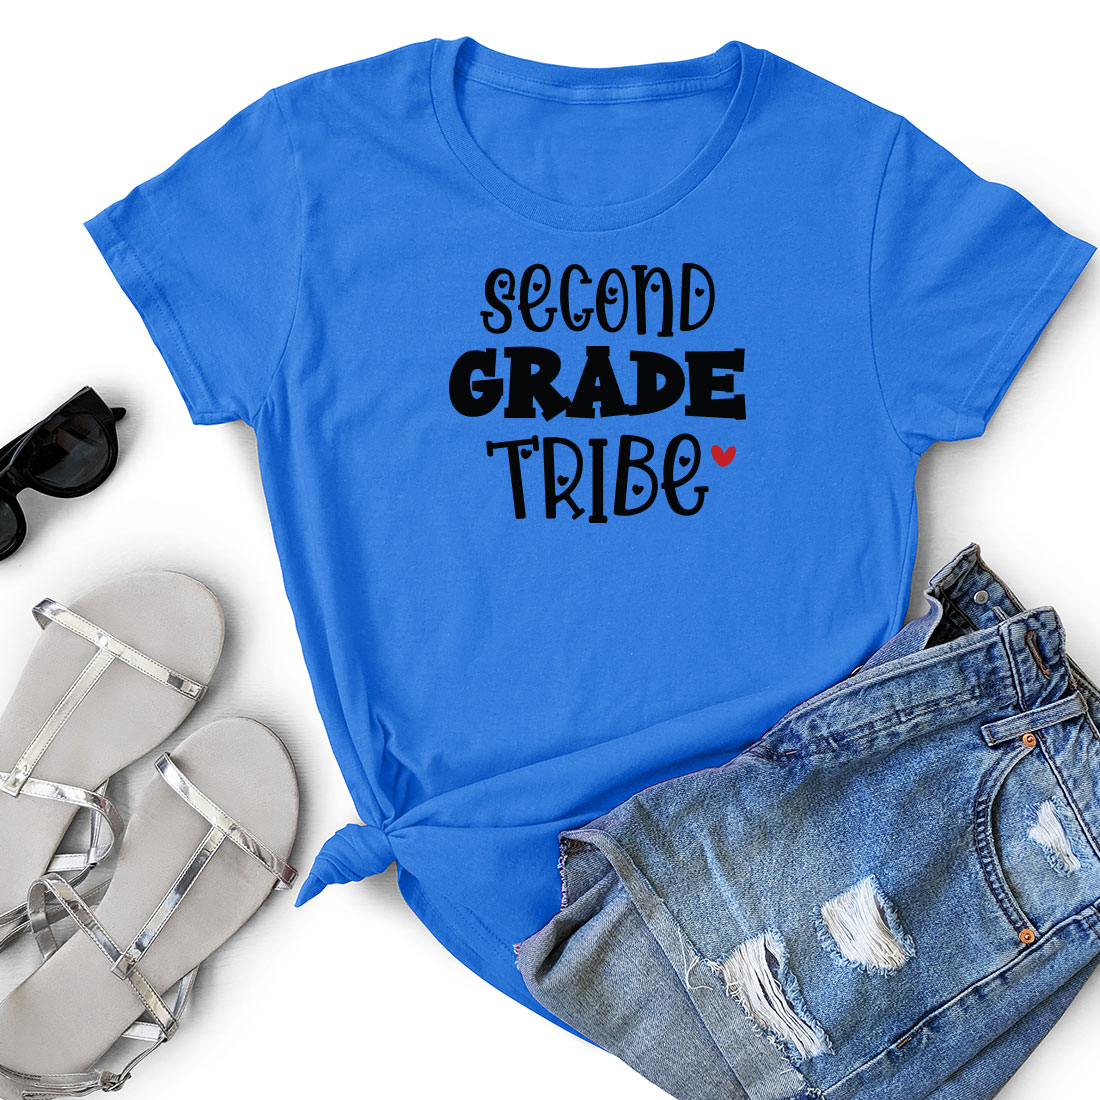 T - shirt that says second grade tribe next to a pair of shorts.